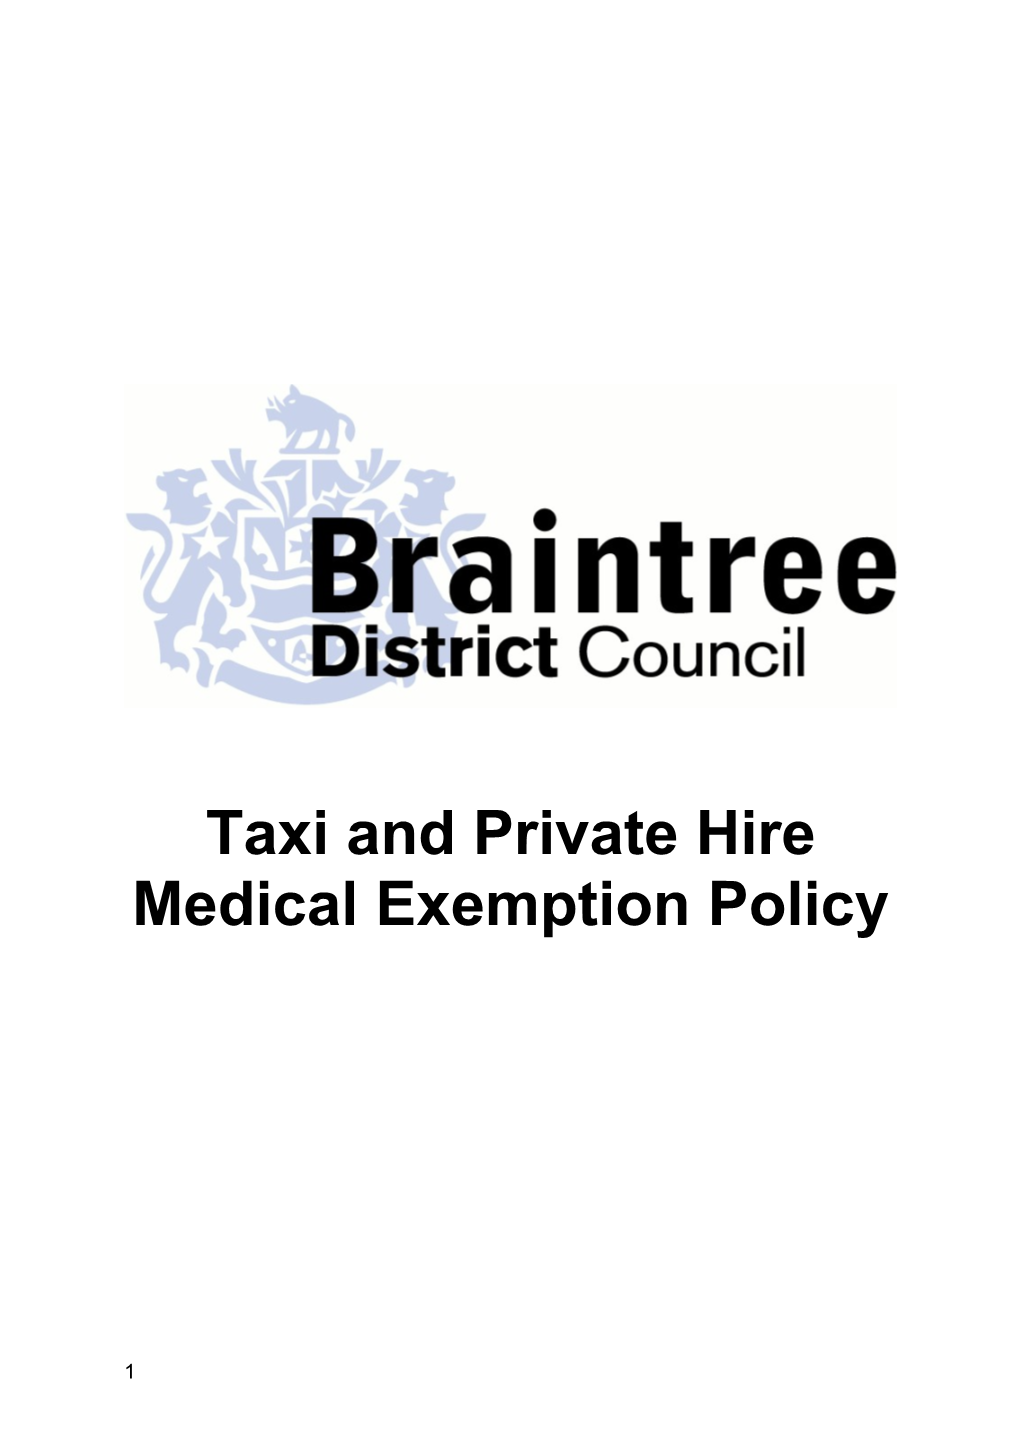 Taxi and Private Hire Medical Exemption Policy